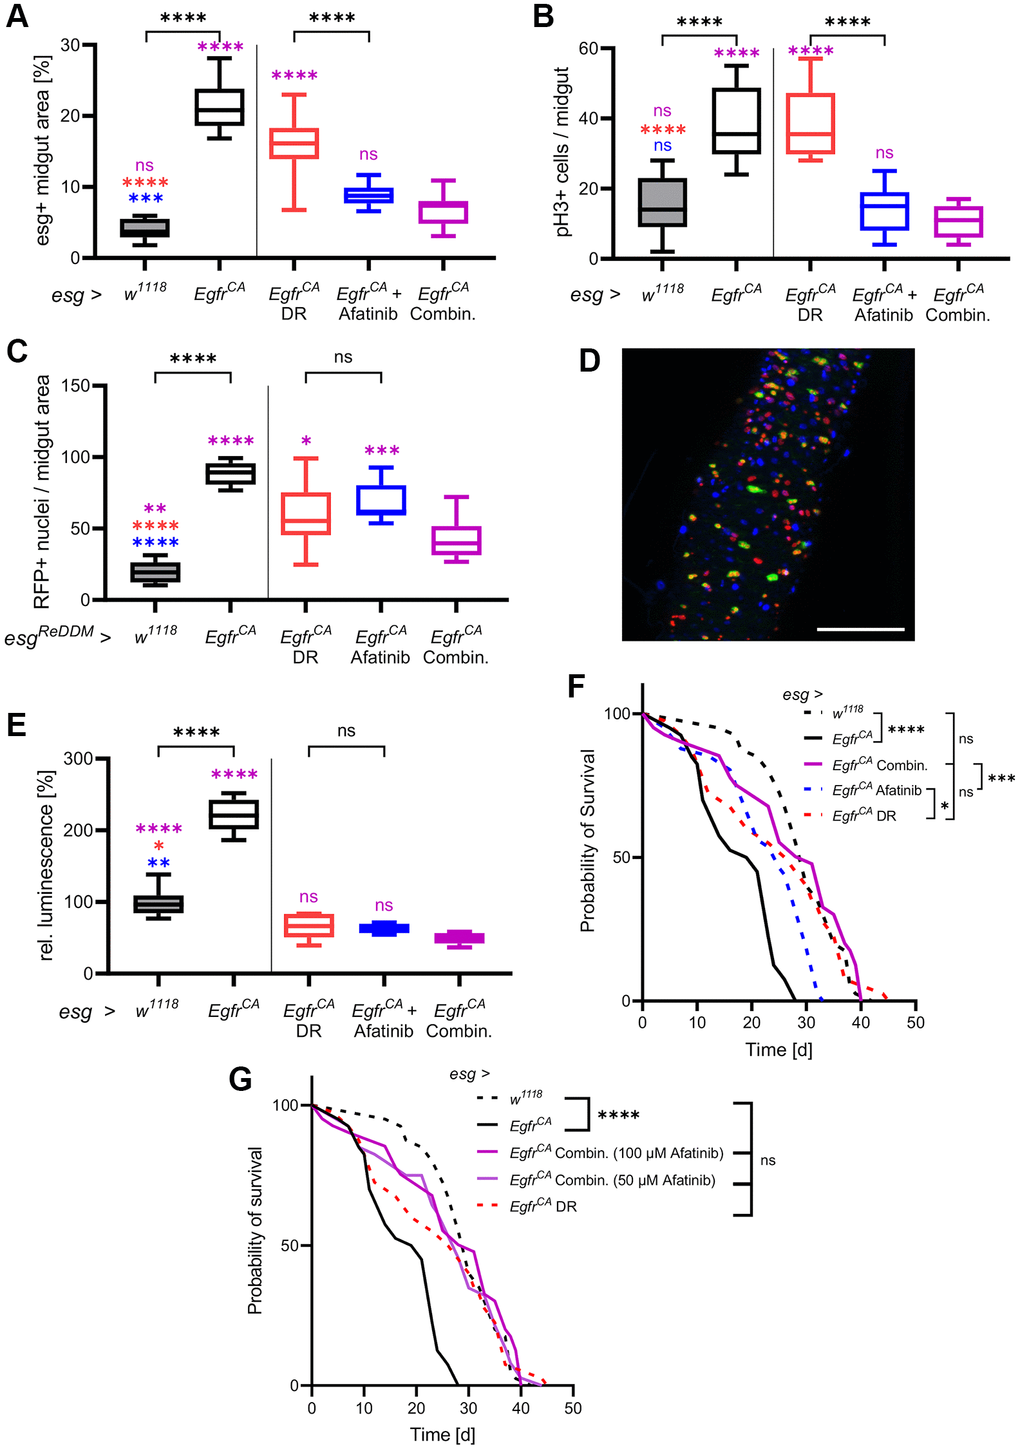 DR combined with afatinib reduces cell proliferation and restores lifespan. Control animals (esg > w1118) and animals with Egfr-induced over-proliferation (esg > EgfrCA) in intestinal stem cells and enteroblasts (esg+ cells) were exposed to a combination of DR and afatinib at induction (shown in magenta). Data were compared to animals that were exposed to dietary restriction (DR, red) or treated with afatinib (blue, 100 μM). (A) Quantification of the area covered by GFP-positive cells indicating the number and size of esg+ cells in the midgut after 5 days of induction. n = 10–13. (B) Midguts were stained with an antibody for phospho-histone 3 to mark cells undergoing mitosis after 5 days of induction. Positively stained cells in the whole midgut were counted. n = 9–11. (C) Quantification of cells that are RFP-positive after 5 days of induction of the ReDDM system. n = 10–11. (D) The combination of both treatments was analysed using the ReDDM system. Esg+ cells are shown in green, RFP-positive progeny are shown in red, and nuclei are shown with blue DAPI staining. (E) Luciferase and GFP were expressed simultaneously and luciferase activity was quantified in whole animals after 15 days of induction. n = 5–7. (F) The lifespan of animals exposed to DR, afatinib, or a combination of DR and 100 μM afatinib. n = 32–40. (G) The lifespan of animals exposed to DR in combination with either 100 μM or 50 μM afatinib. n = 32–40. Statistical significance was tested by one-way ANOVA and the Tukey test. Lifespan significance was tested by the log-rank (Mantel-Cox) test. Significances are marked with lines or corresponding color. ns = not significant, * = p ** = p *** = p **** = p 